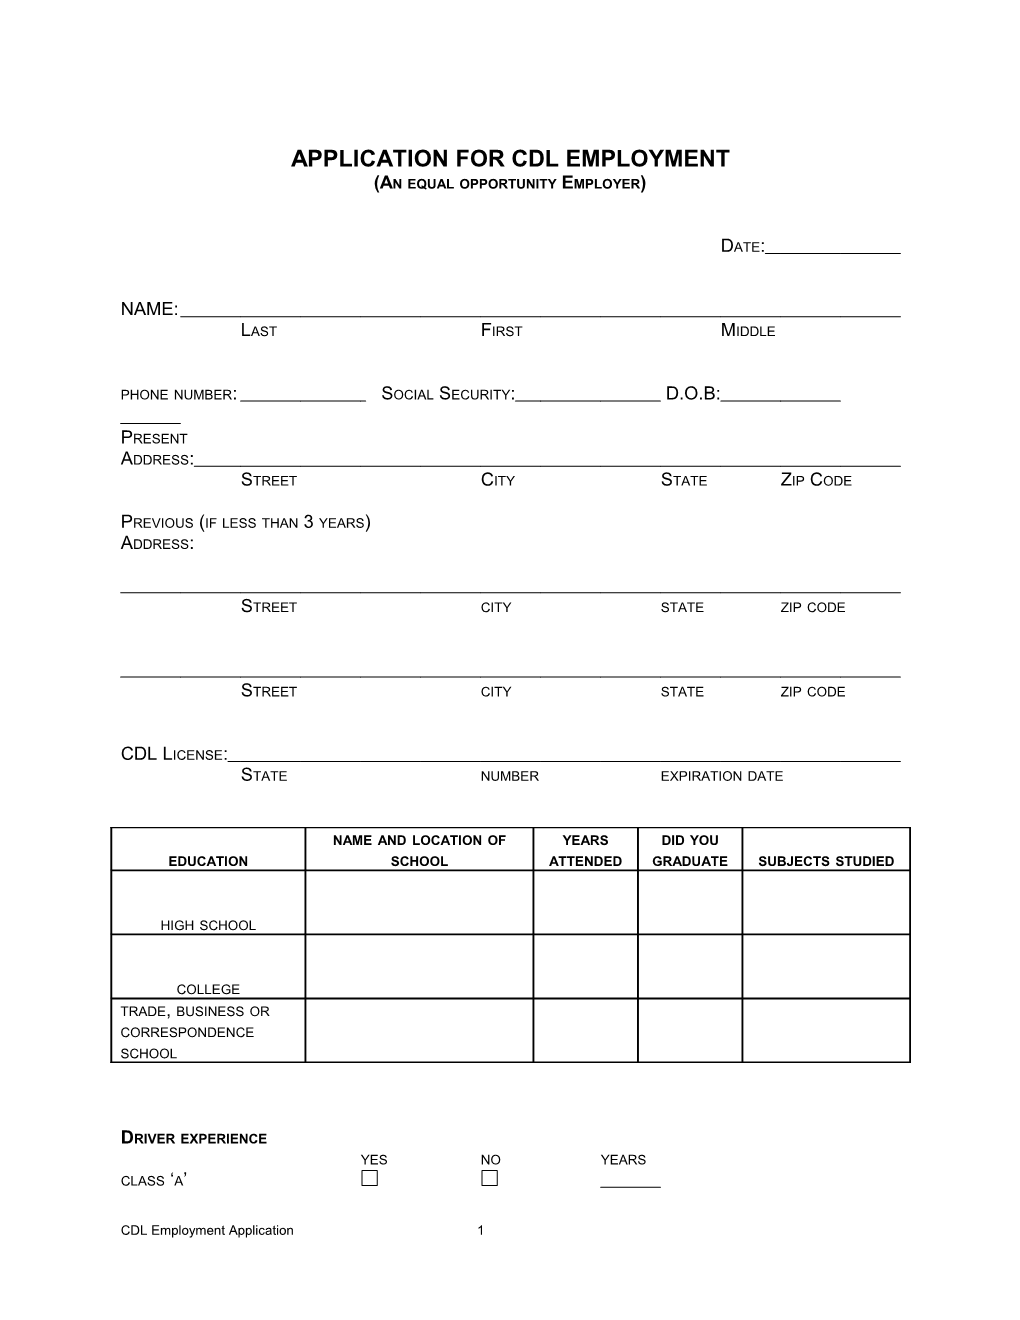 Application for Cdl Employment